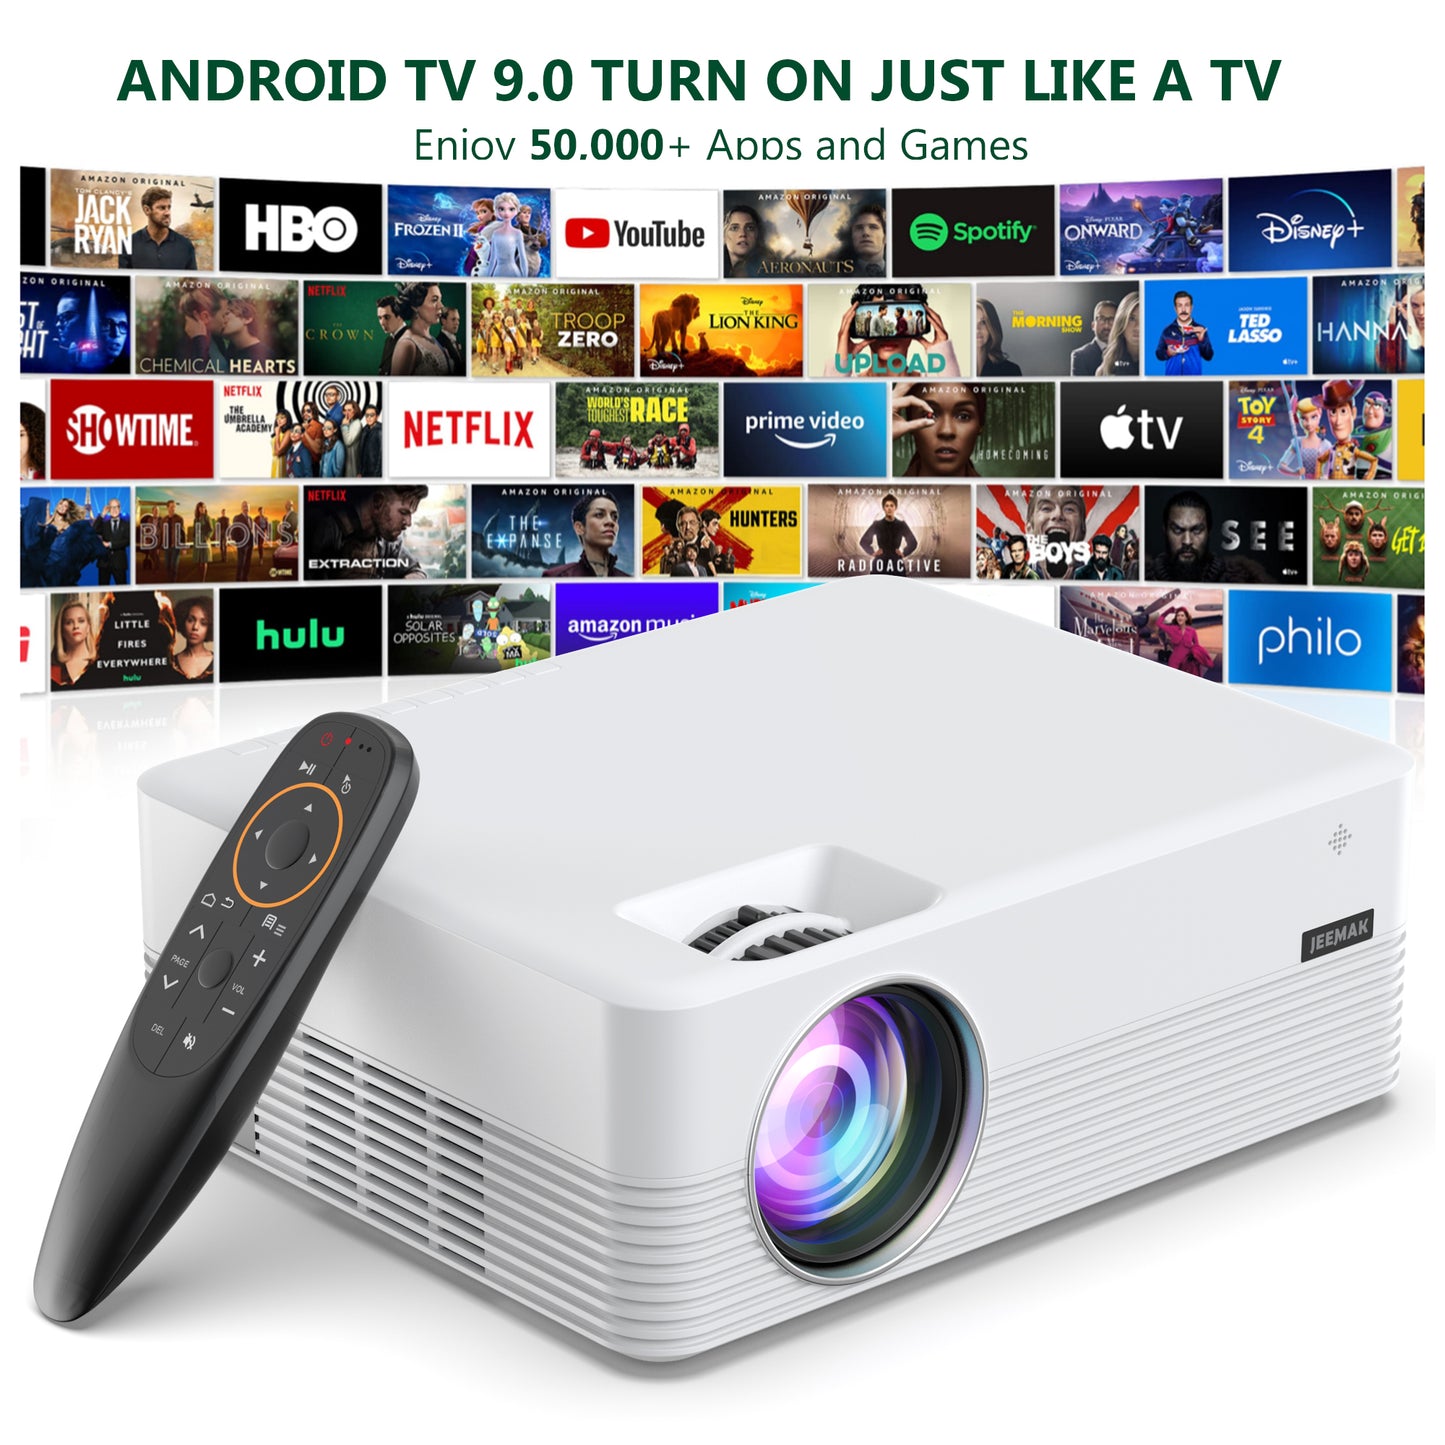 JEEMAK WiFi Movie Projectors Bluetooth Android TV 9.0 Smart Projector, 1080P and 170 Inch Display Supported, 6000 Lumens